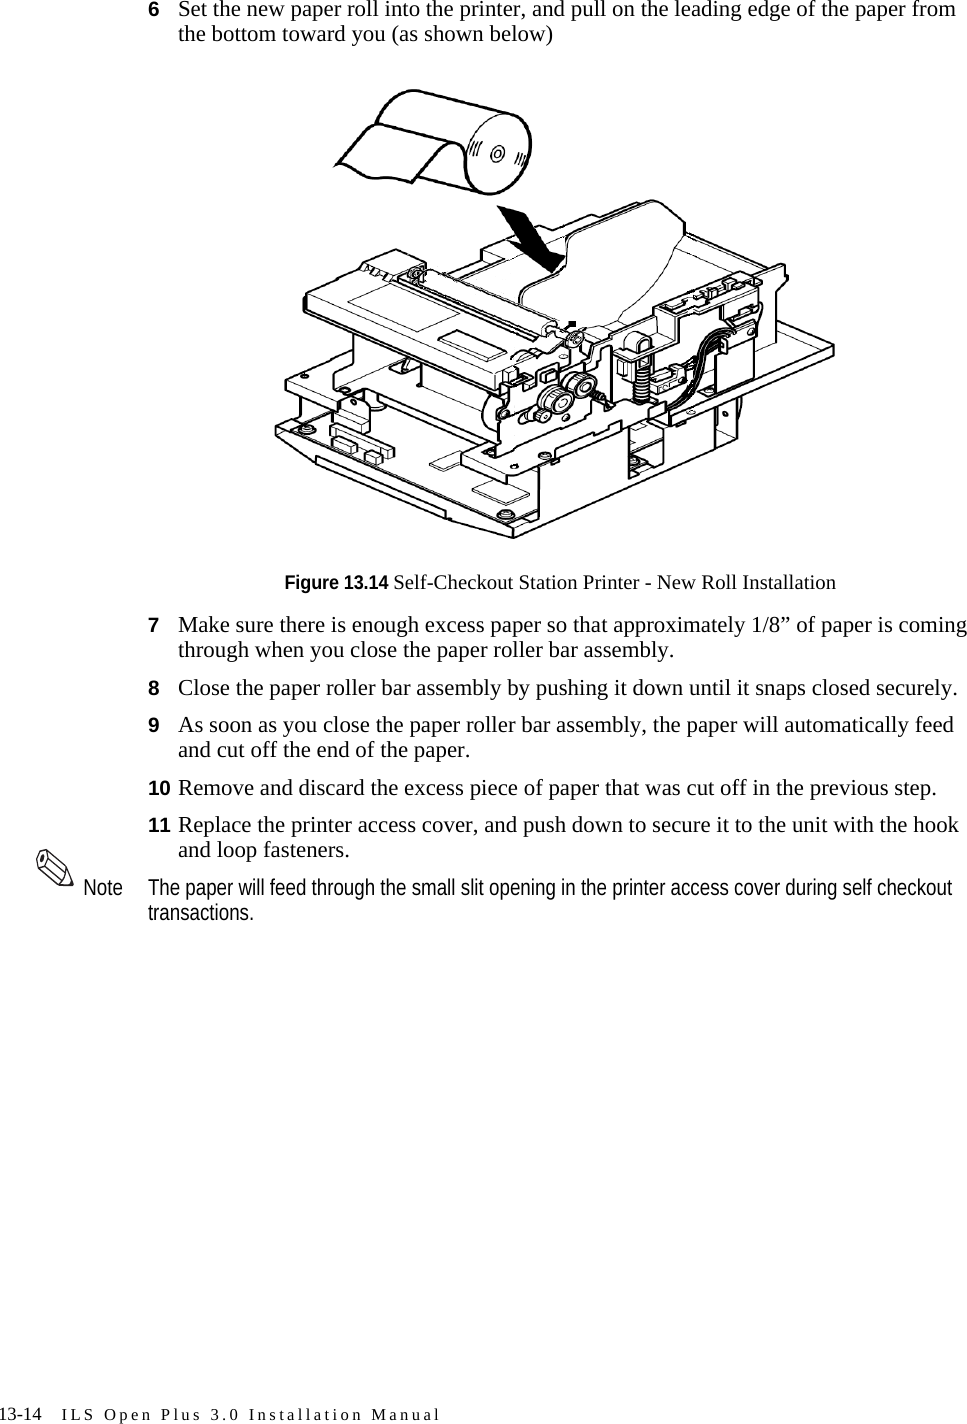 13-14 ILS Open Plus 3.0 Installation Manual6Set the new paper roll into the printer, and pull on the leading edge of the paper from the bottom toward you (as shown below)Figure 13.14 Self-Checkout Station Printer - New Roll Installation7Make sure there is enough excess paper so that approximately 1/8” of paper is coming through when you close the paper roller bar assembly.8Close the paper roller bar assembly by pushing it down until it snaps closed securely.9As soon as you close the paper roller bar assembly, the paper will automatically feed and cut off the end of the paper.10 Remove and discard the excess piece of paper that was cut off in the previous step.11 Replace the printer access cover, and push down to secure it to the unit with the hook and loop fasteners.Note The paper will feed through the small slit opening in the printer access cover during self checkout transactions.